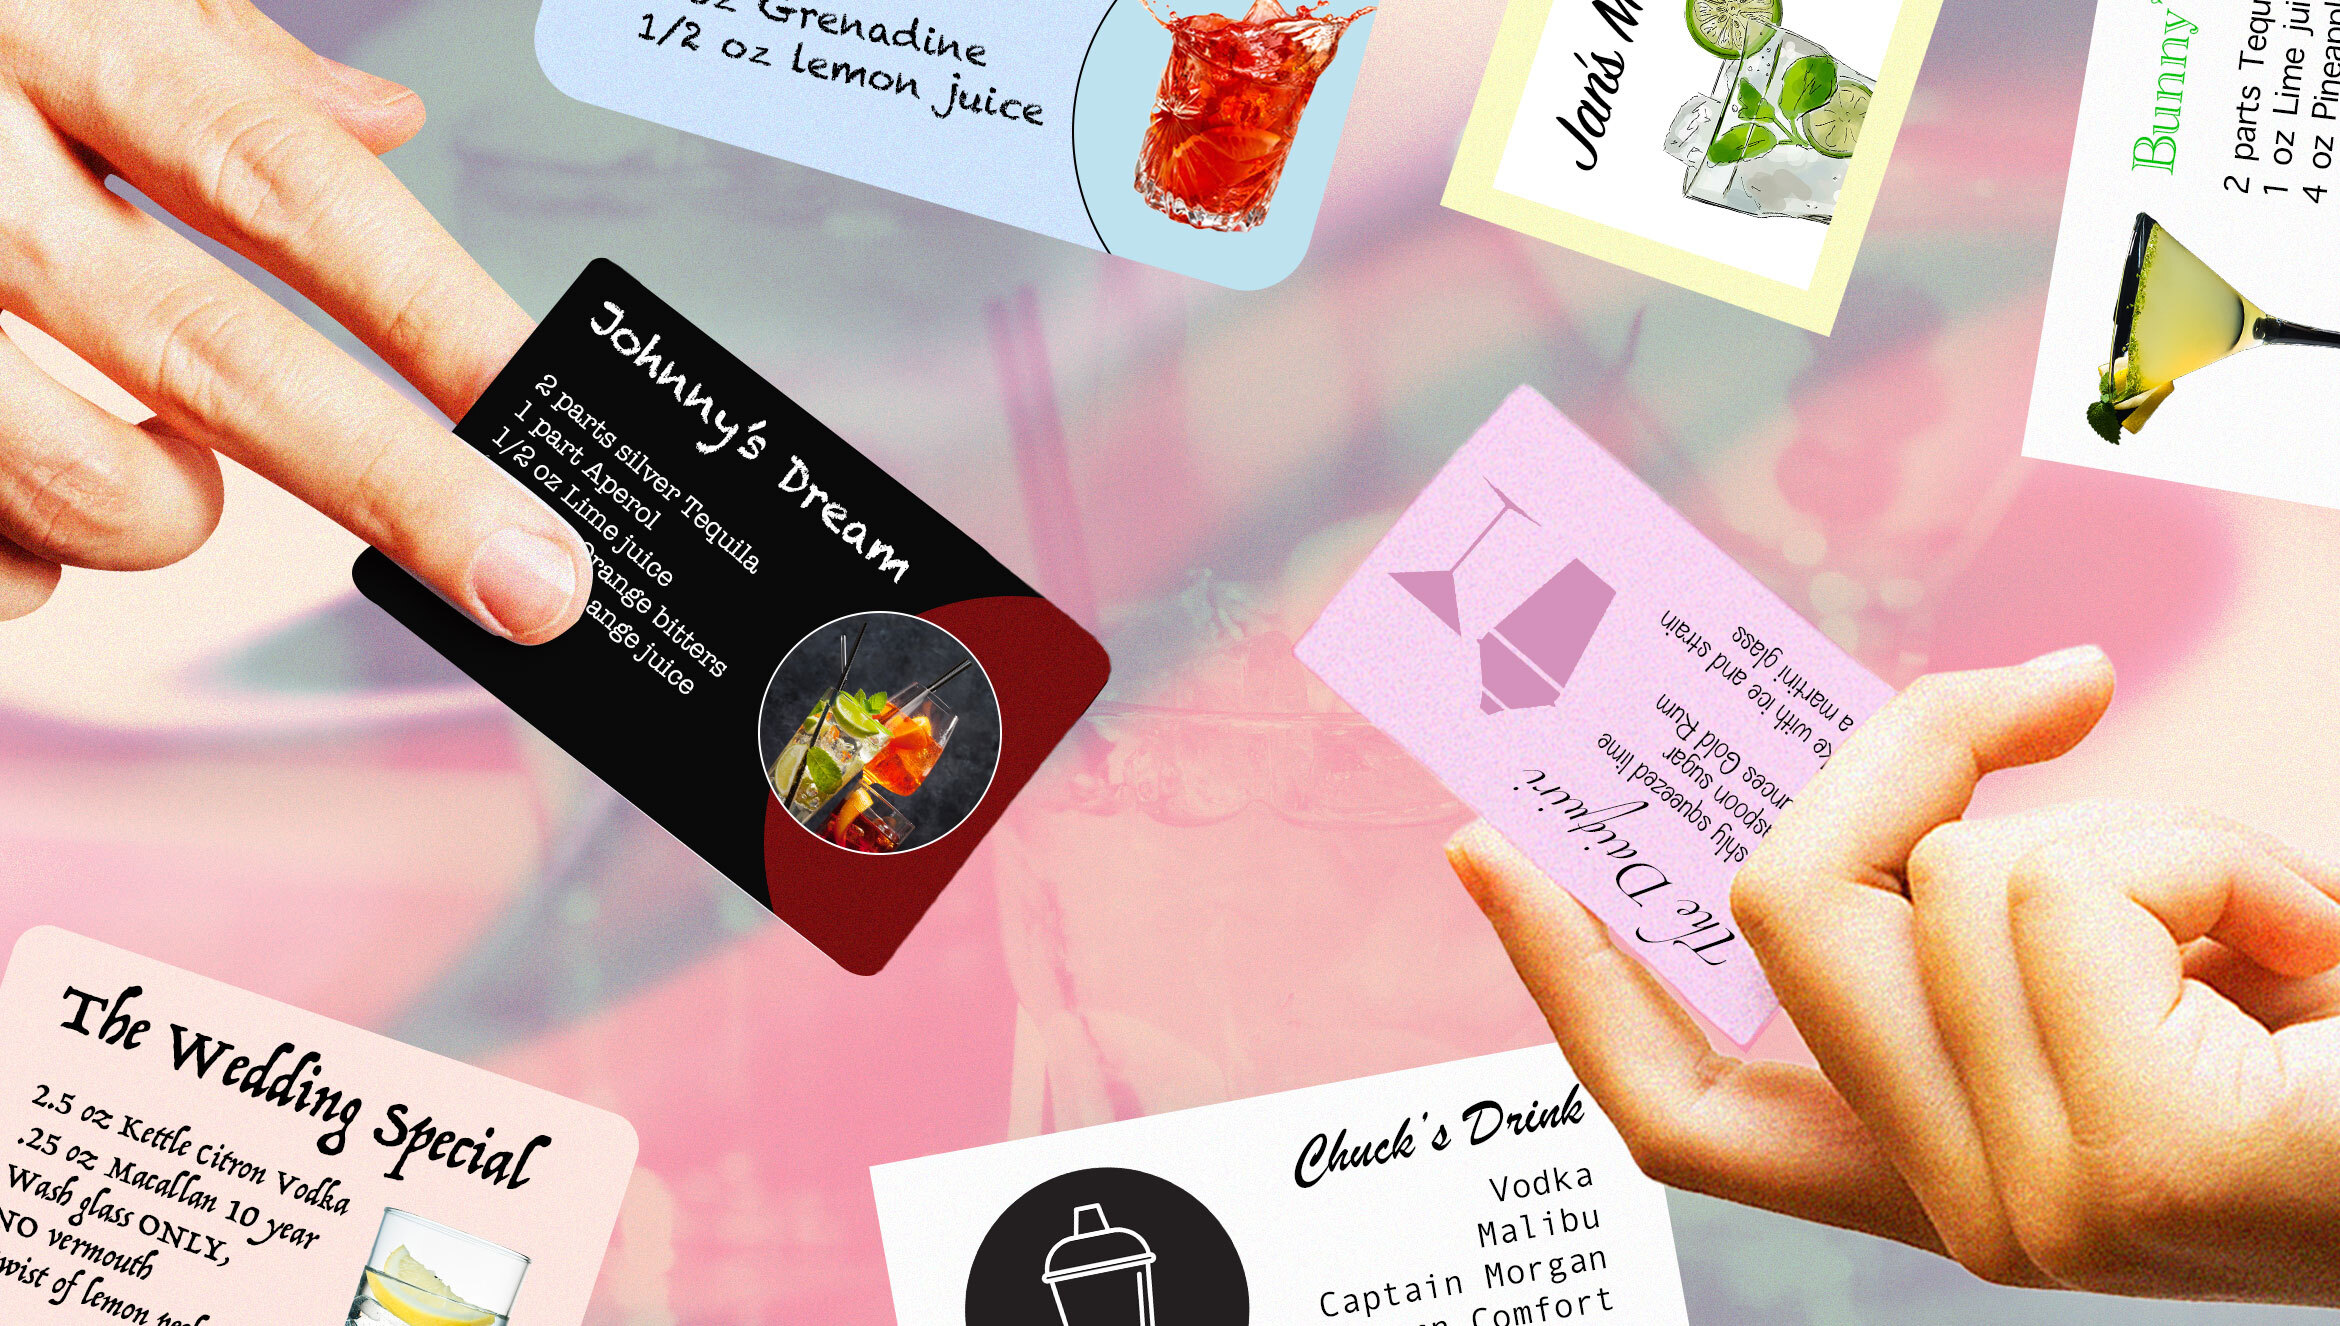 An array of business cards printed with cocktail recipes